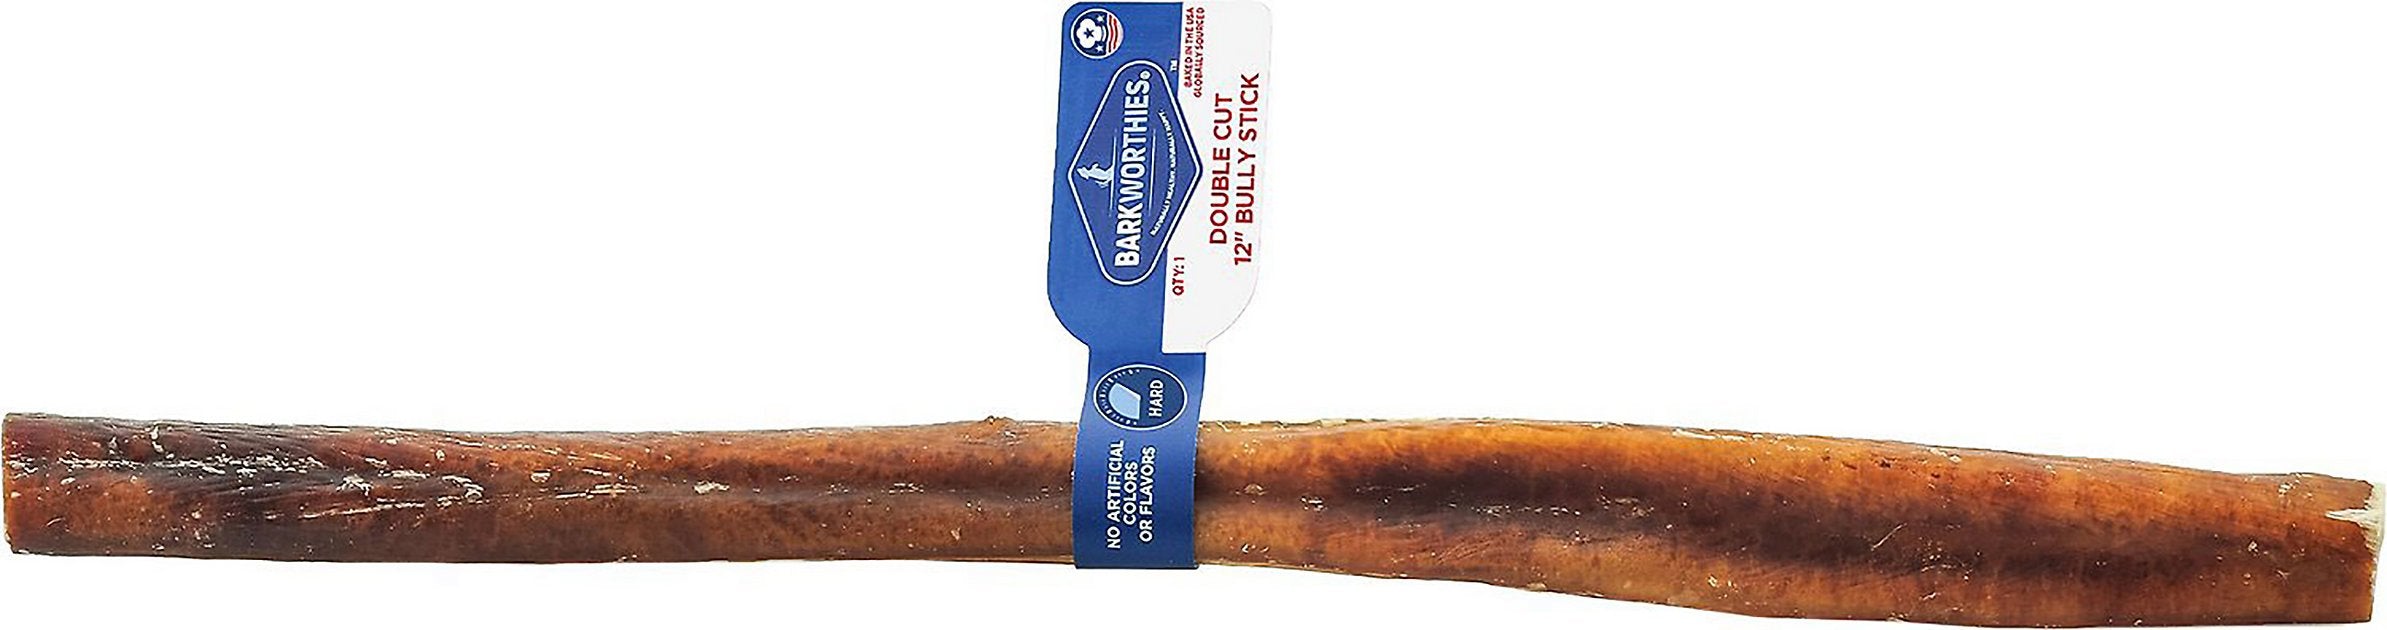 Barkworthies Odor Free American Baked Dog Bully Sticks - 12" Double Cut - 25 ct Case - Case of 1  